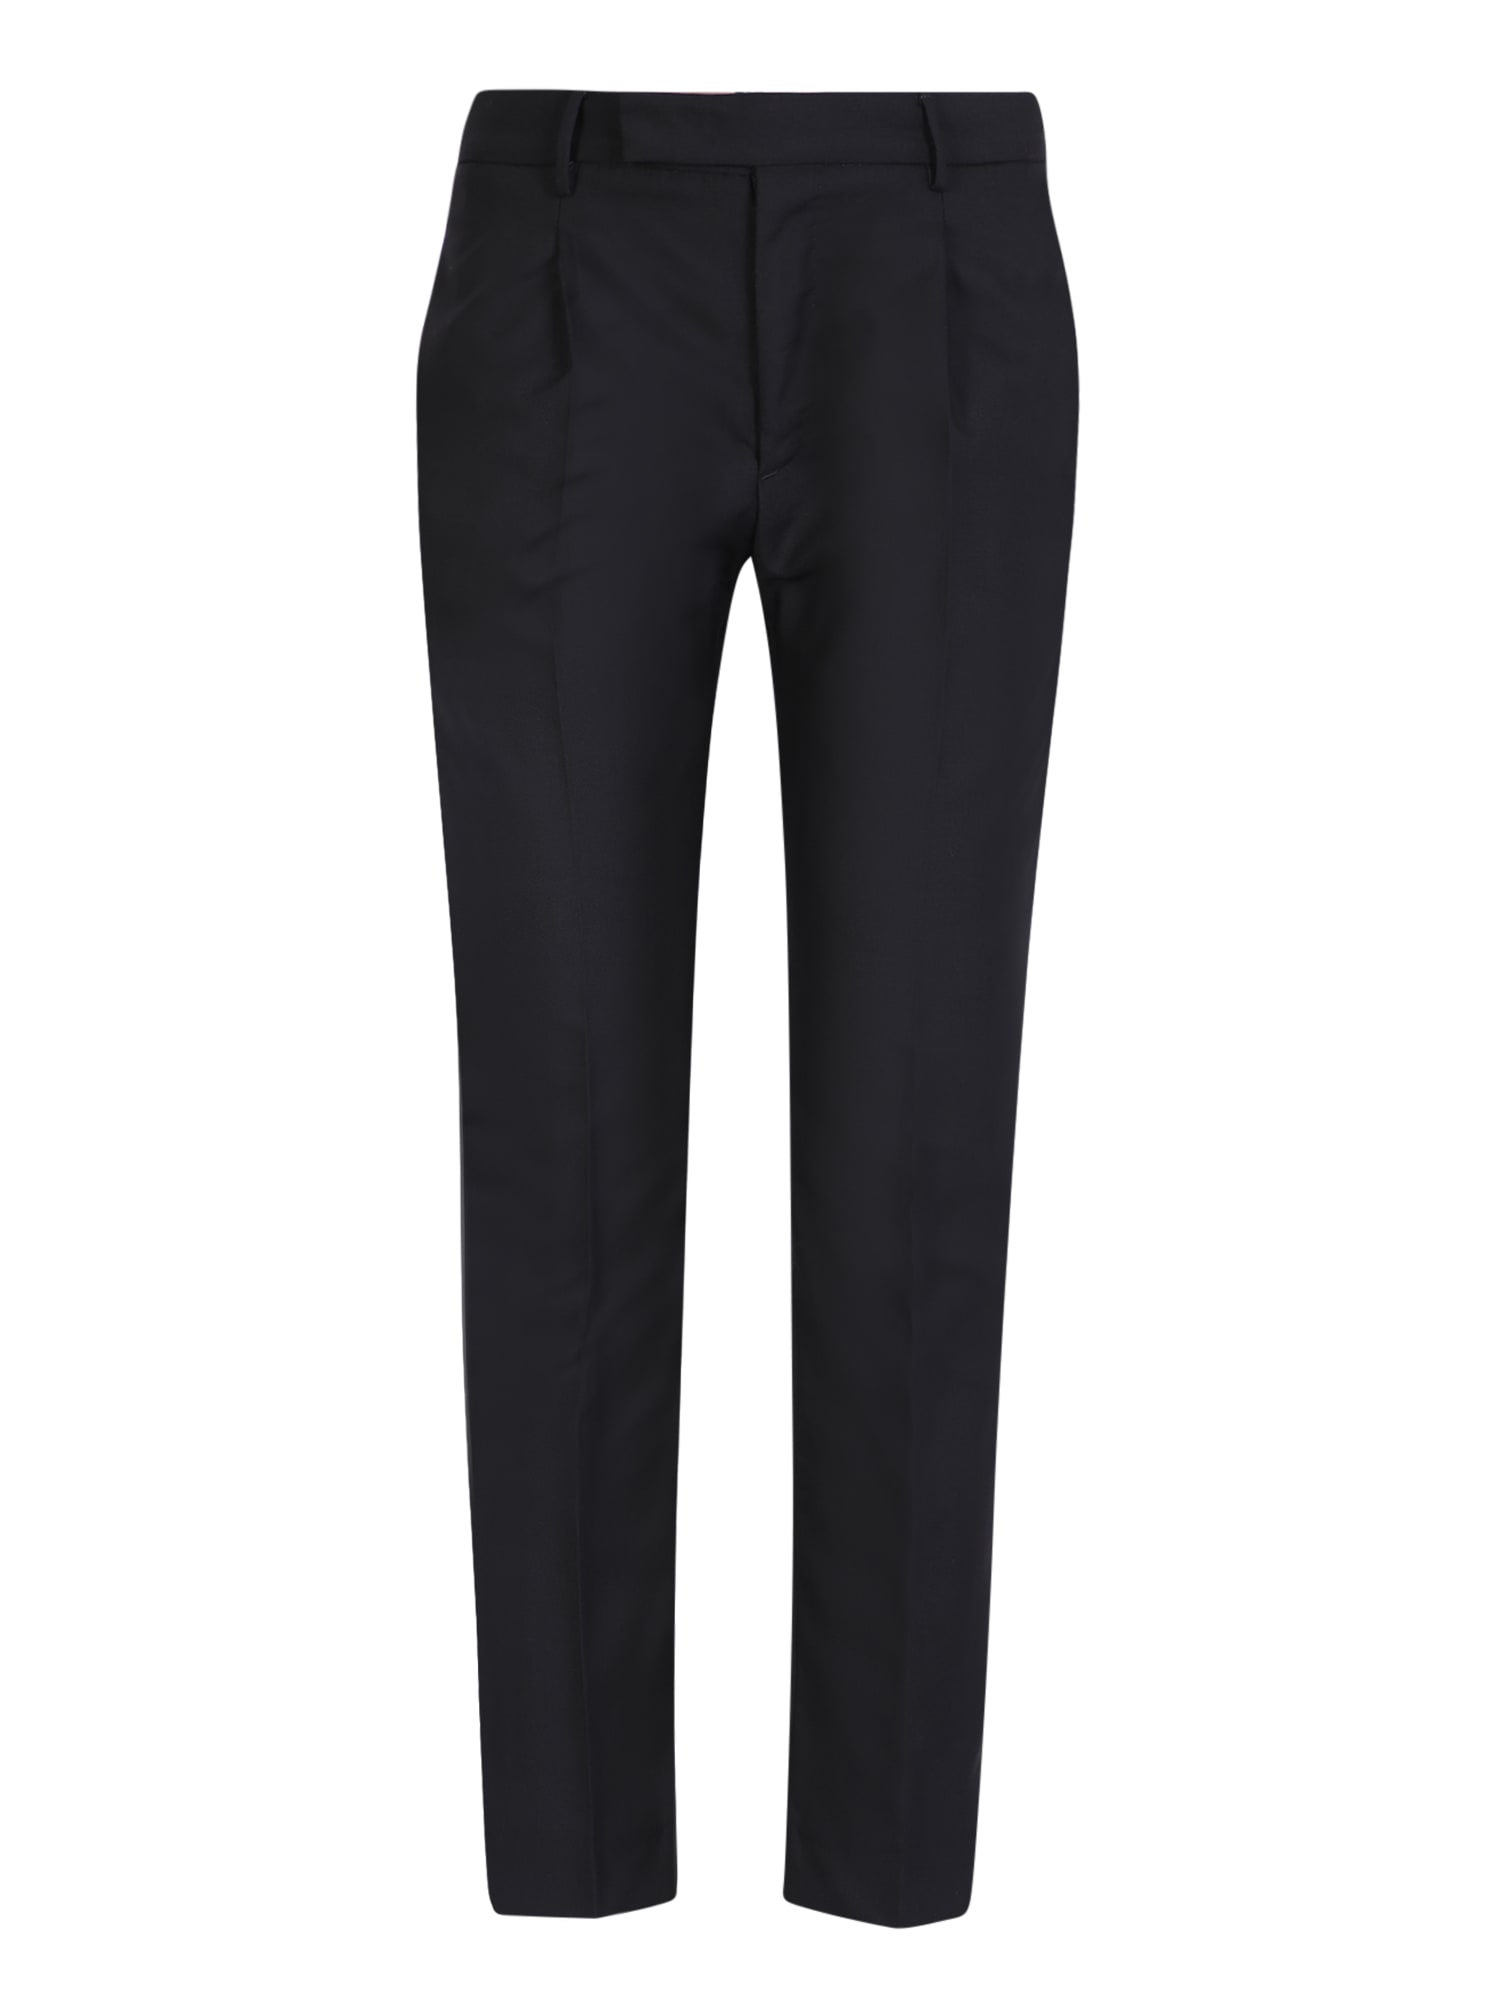 Pt01 Black Skinny Tailored Trousers